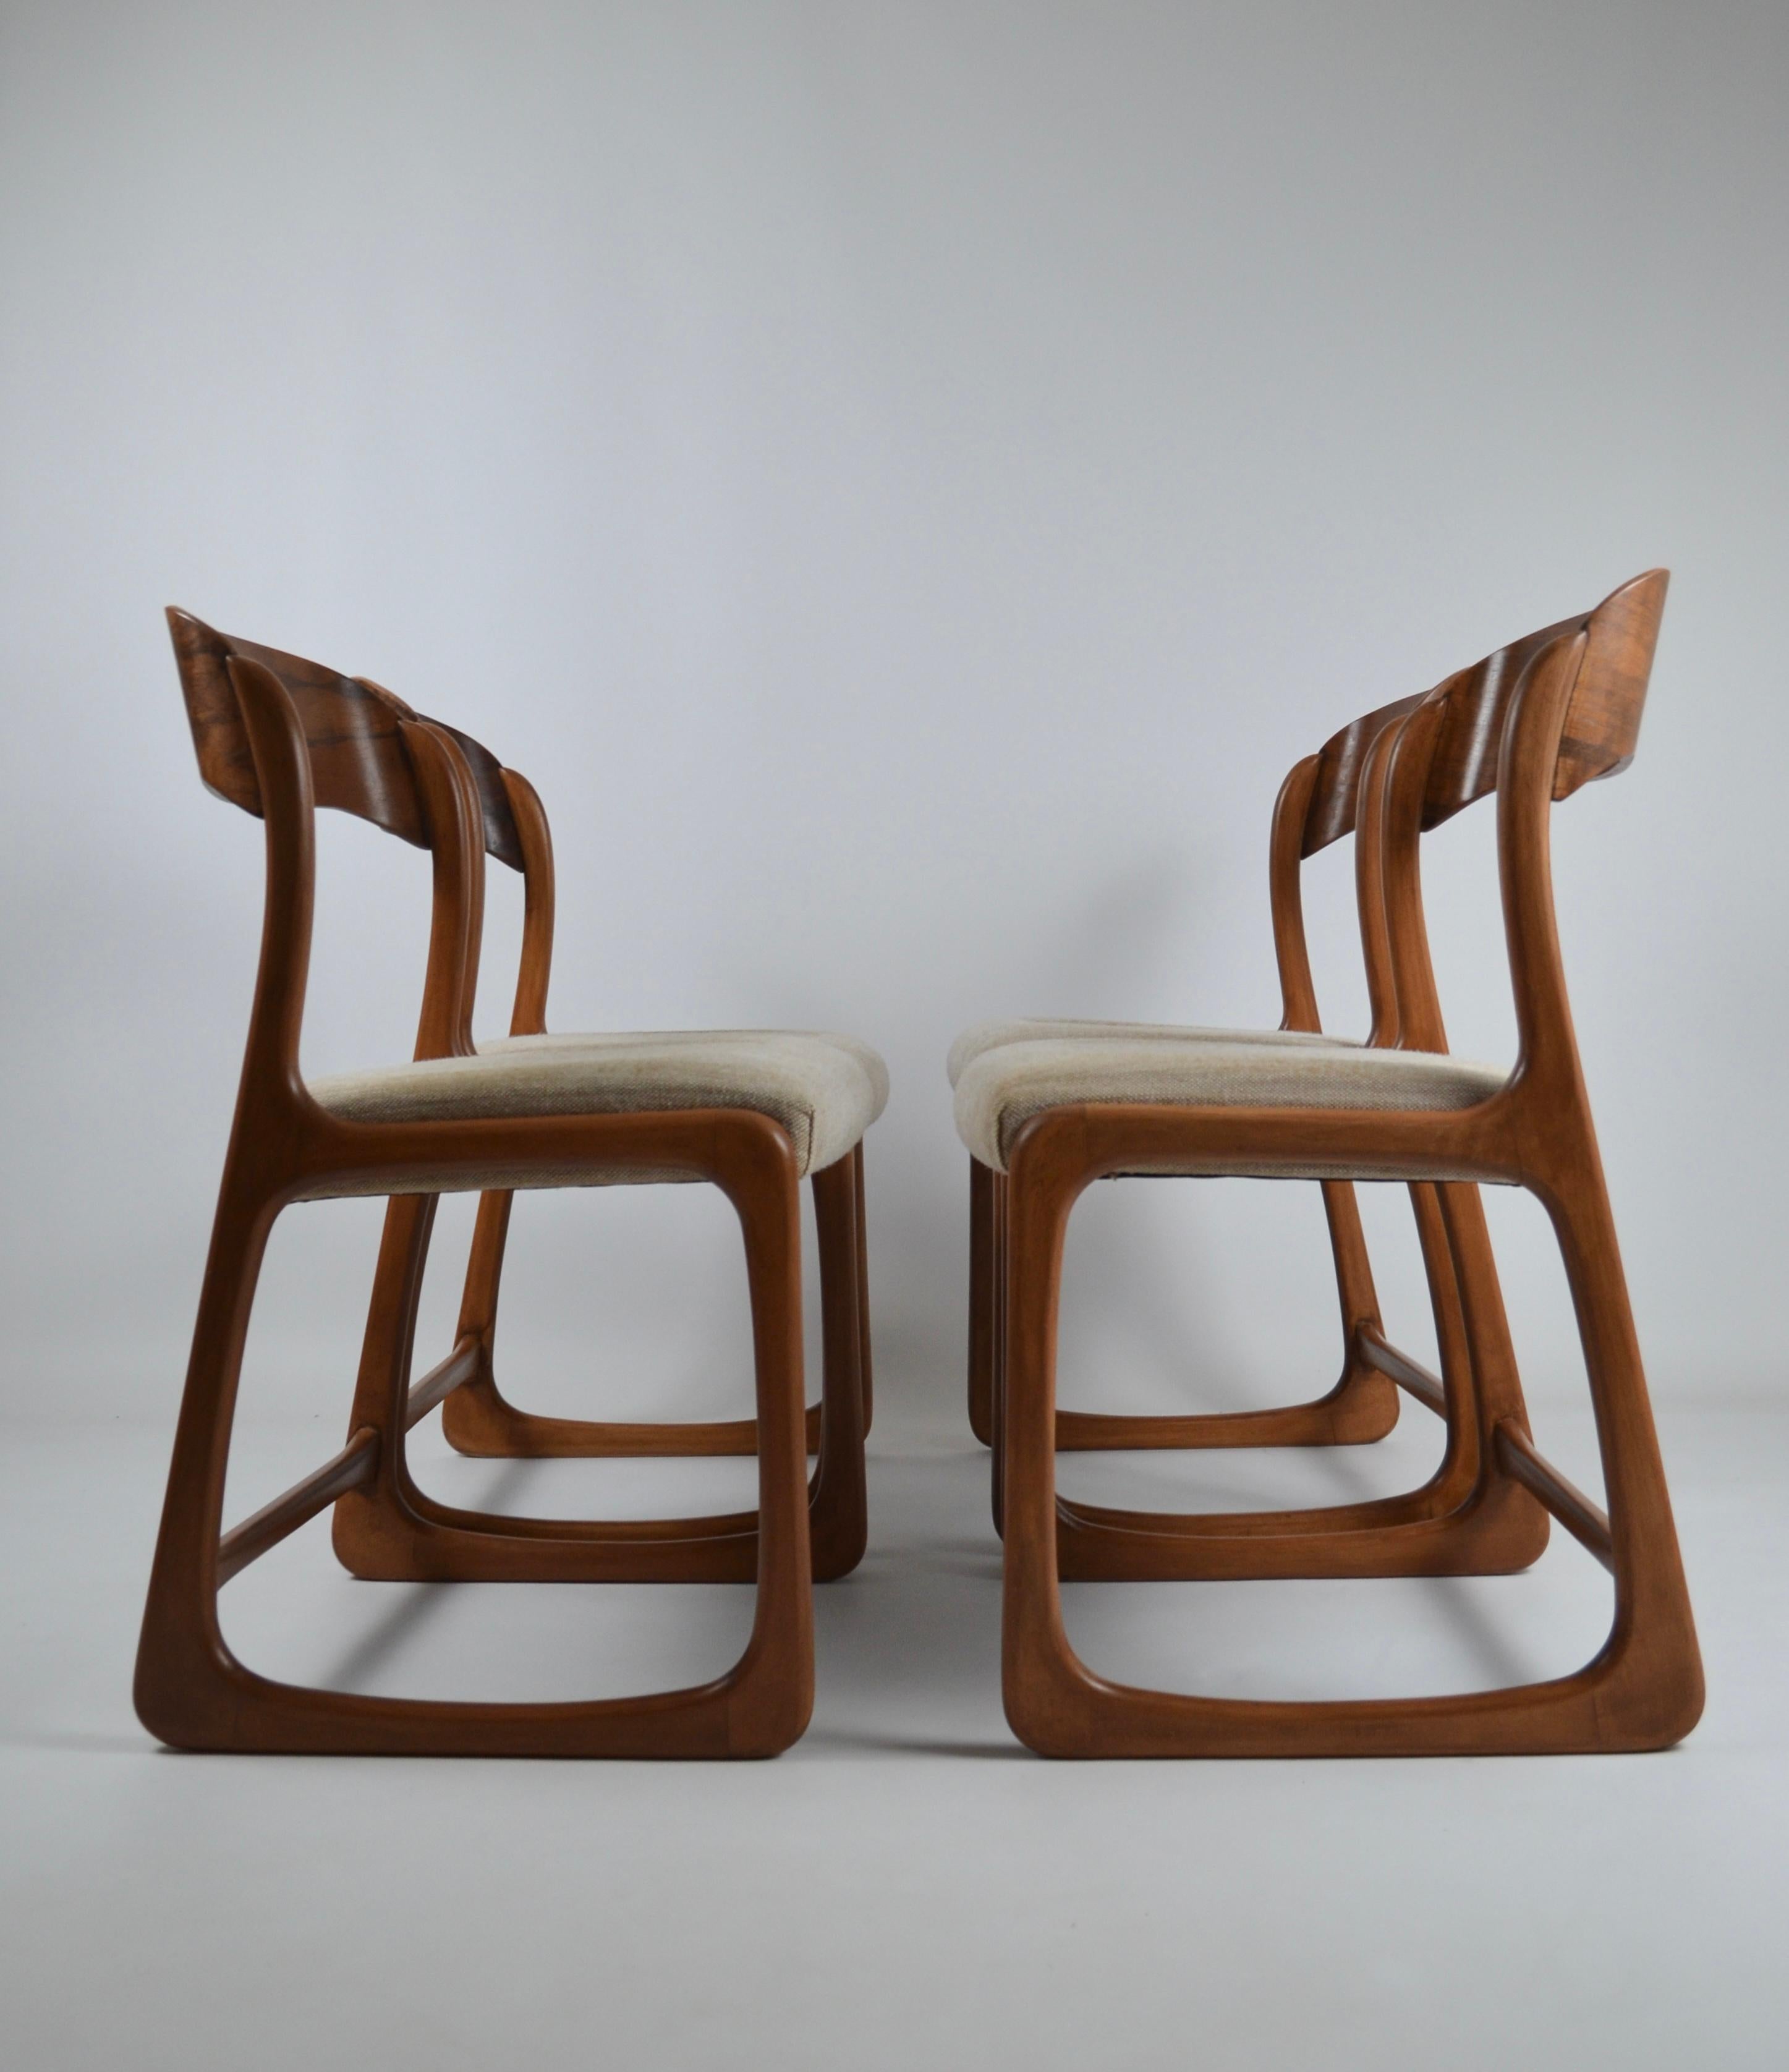 Vintage French Traineau or Sleigh Dining Chairs, Baumann, France, 60s For Sale 2